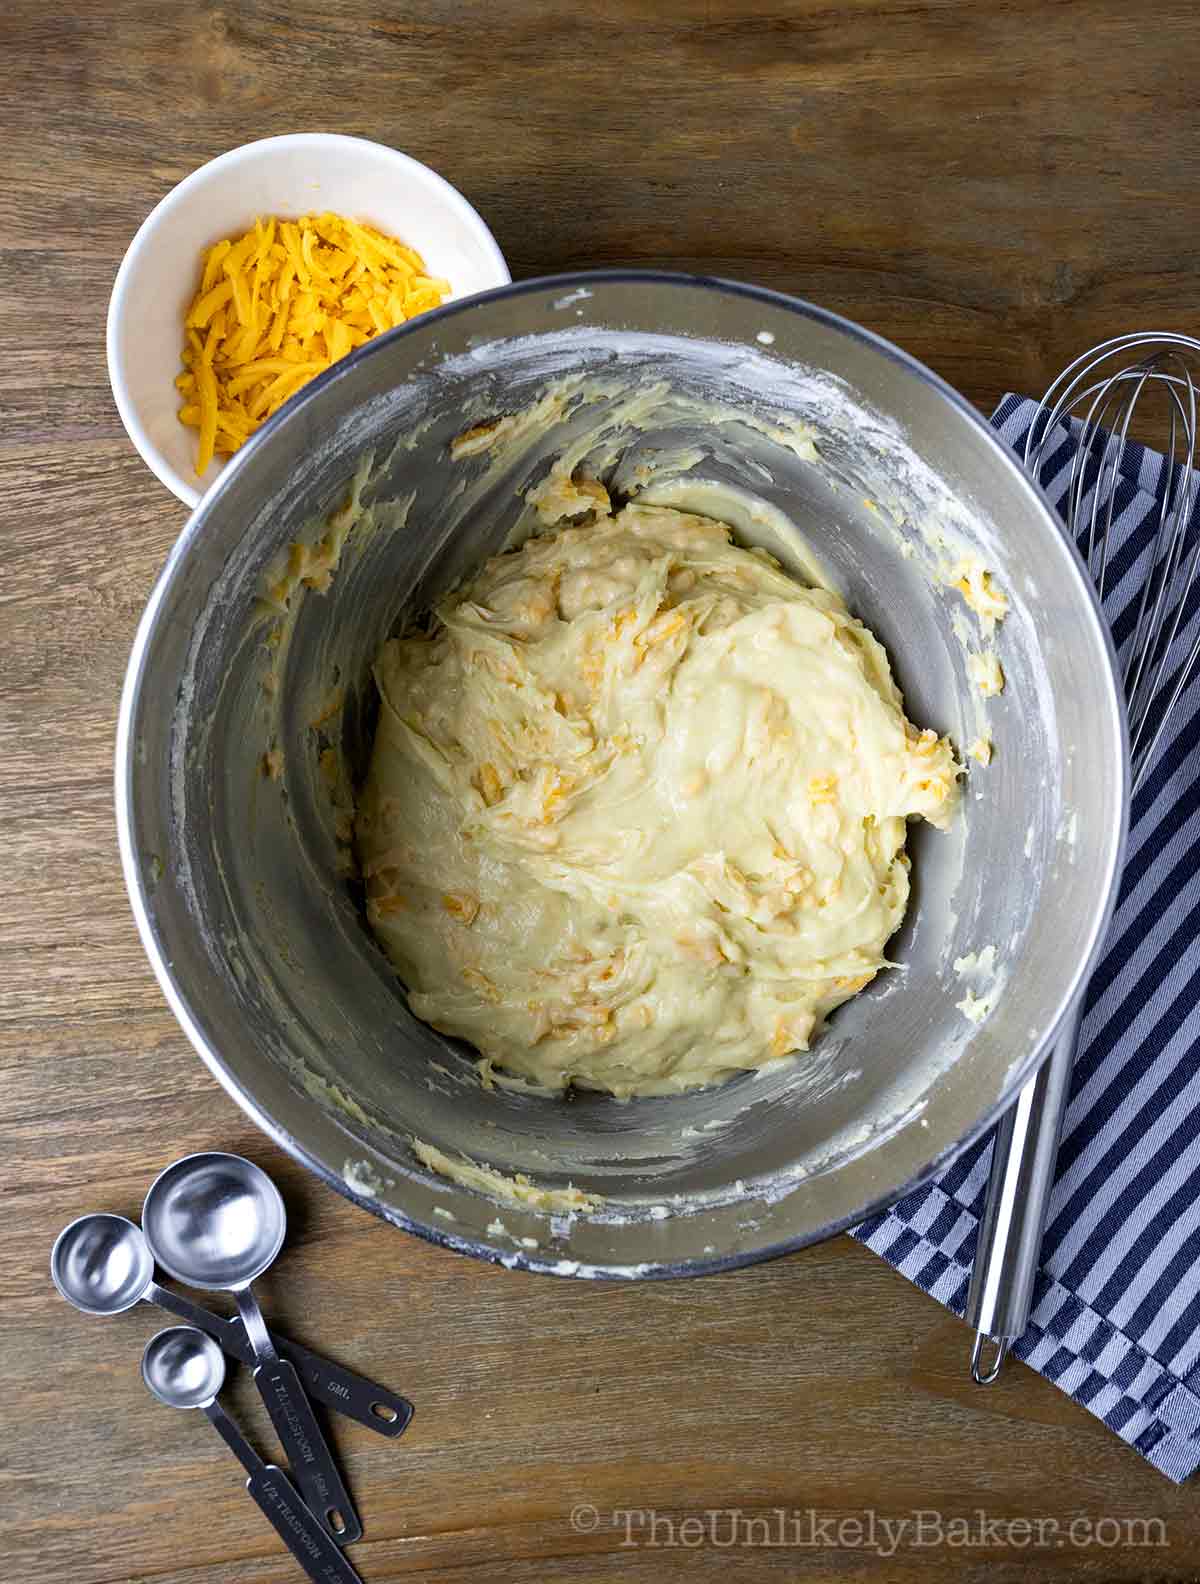 Cheese cupcake batter in a bowl.